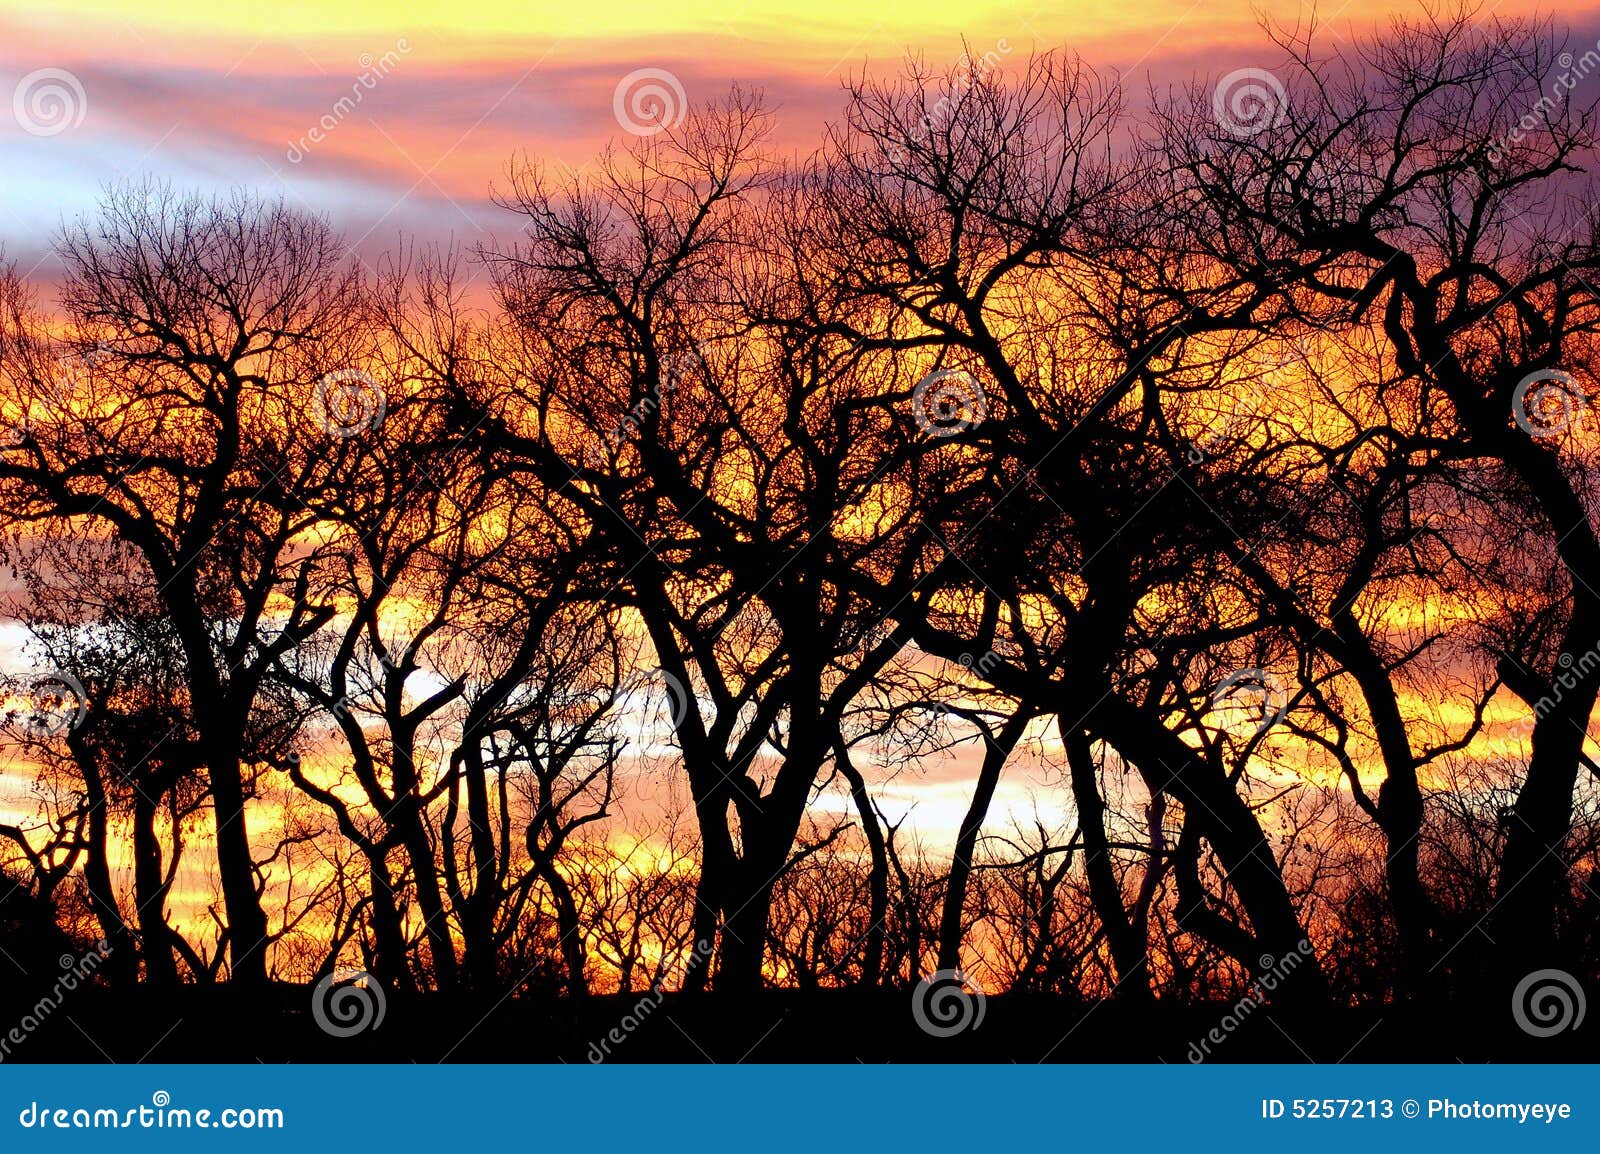 trees silhouetted at sunset